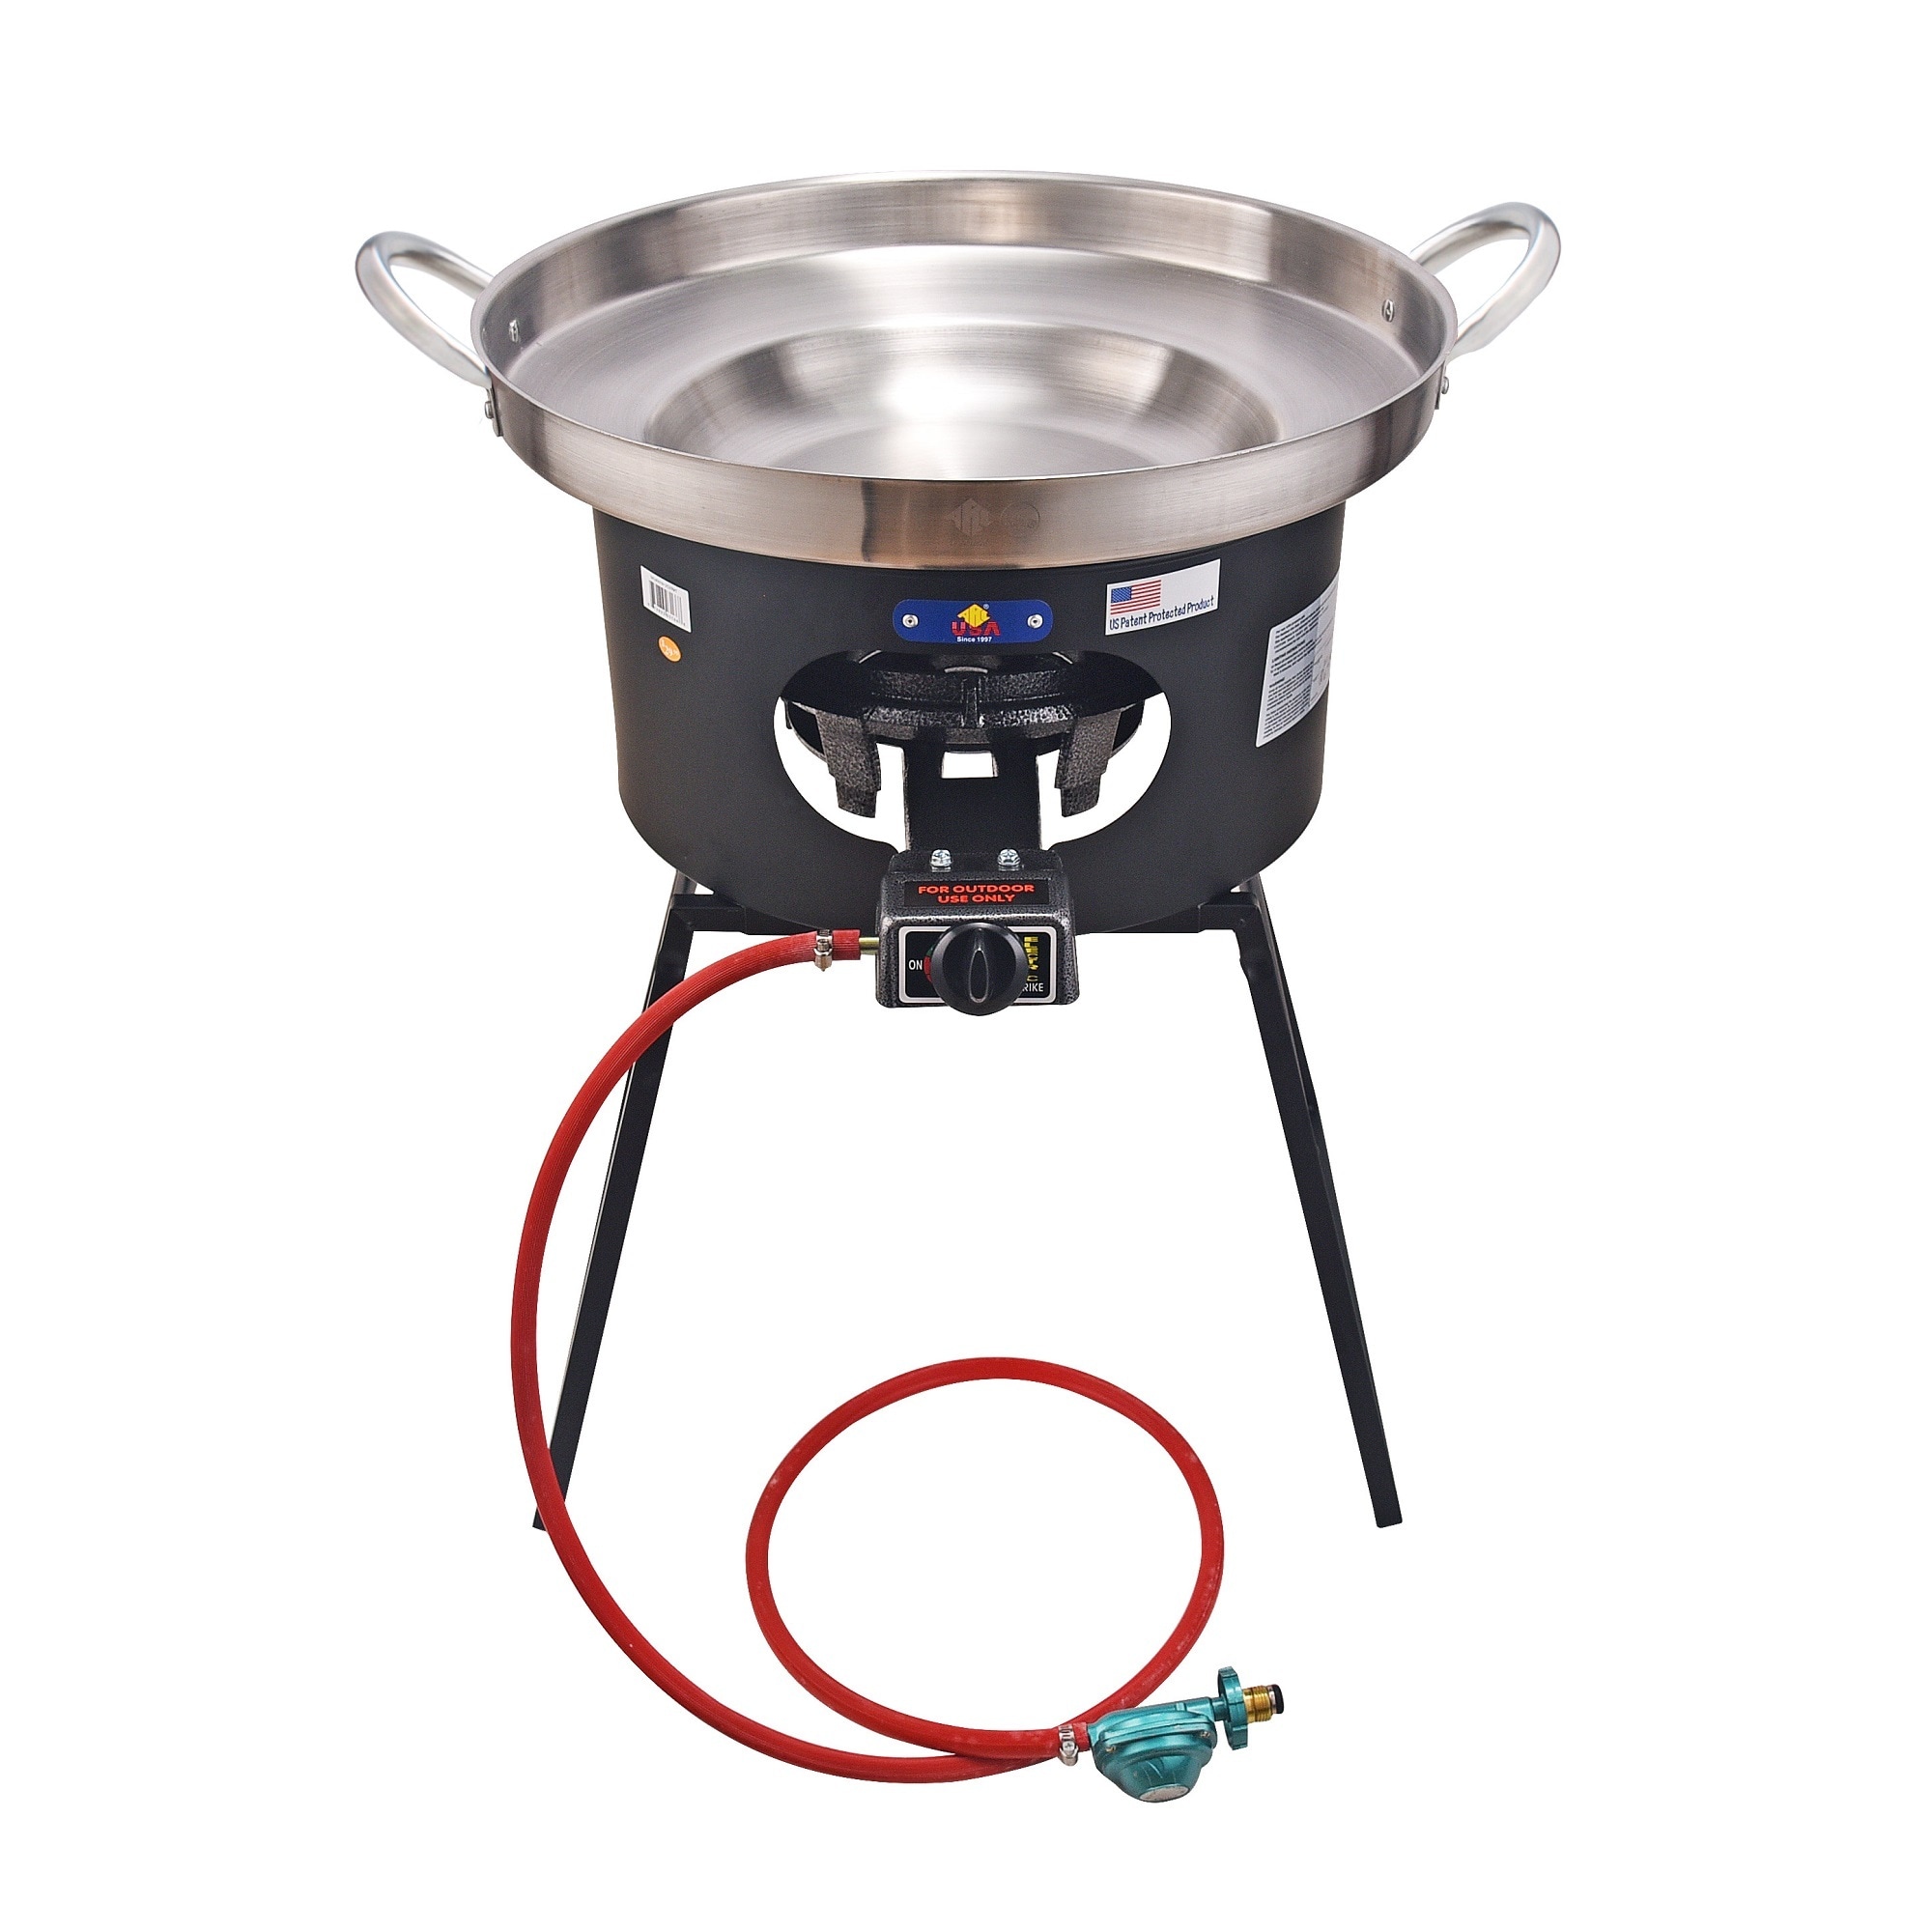 ARC Propane Burners For Outdoor, Wok Burner Single Propane Burner With  Adjustable Legs, 65,000BTU Cast Iron Portable Propane Stove Great For  Camping